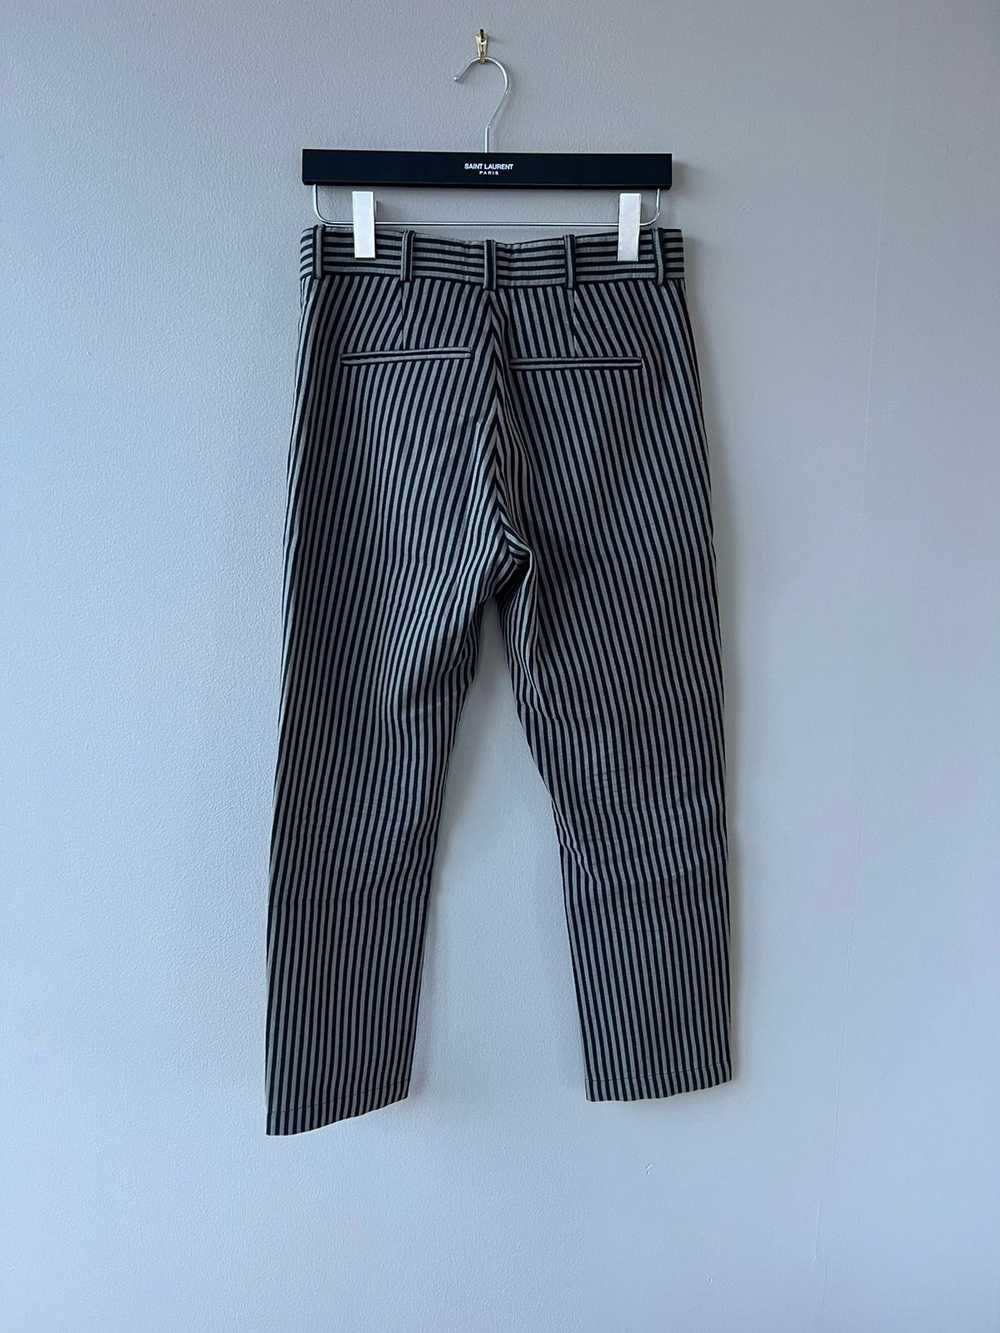 Ann Demeulemeester AW15 Striped Slim Trousers - image 4